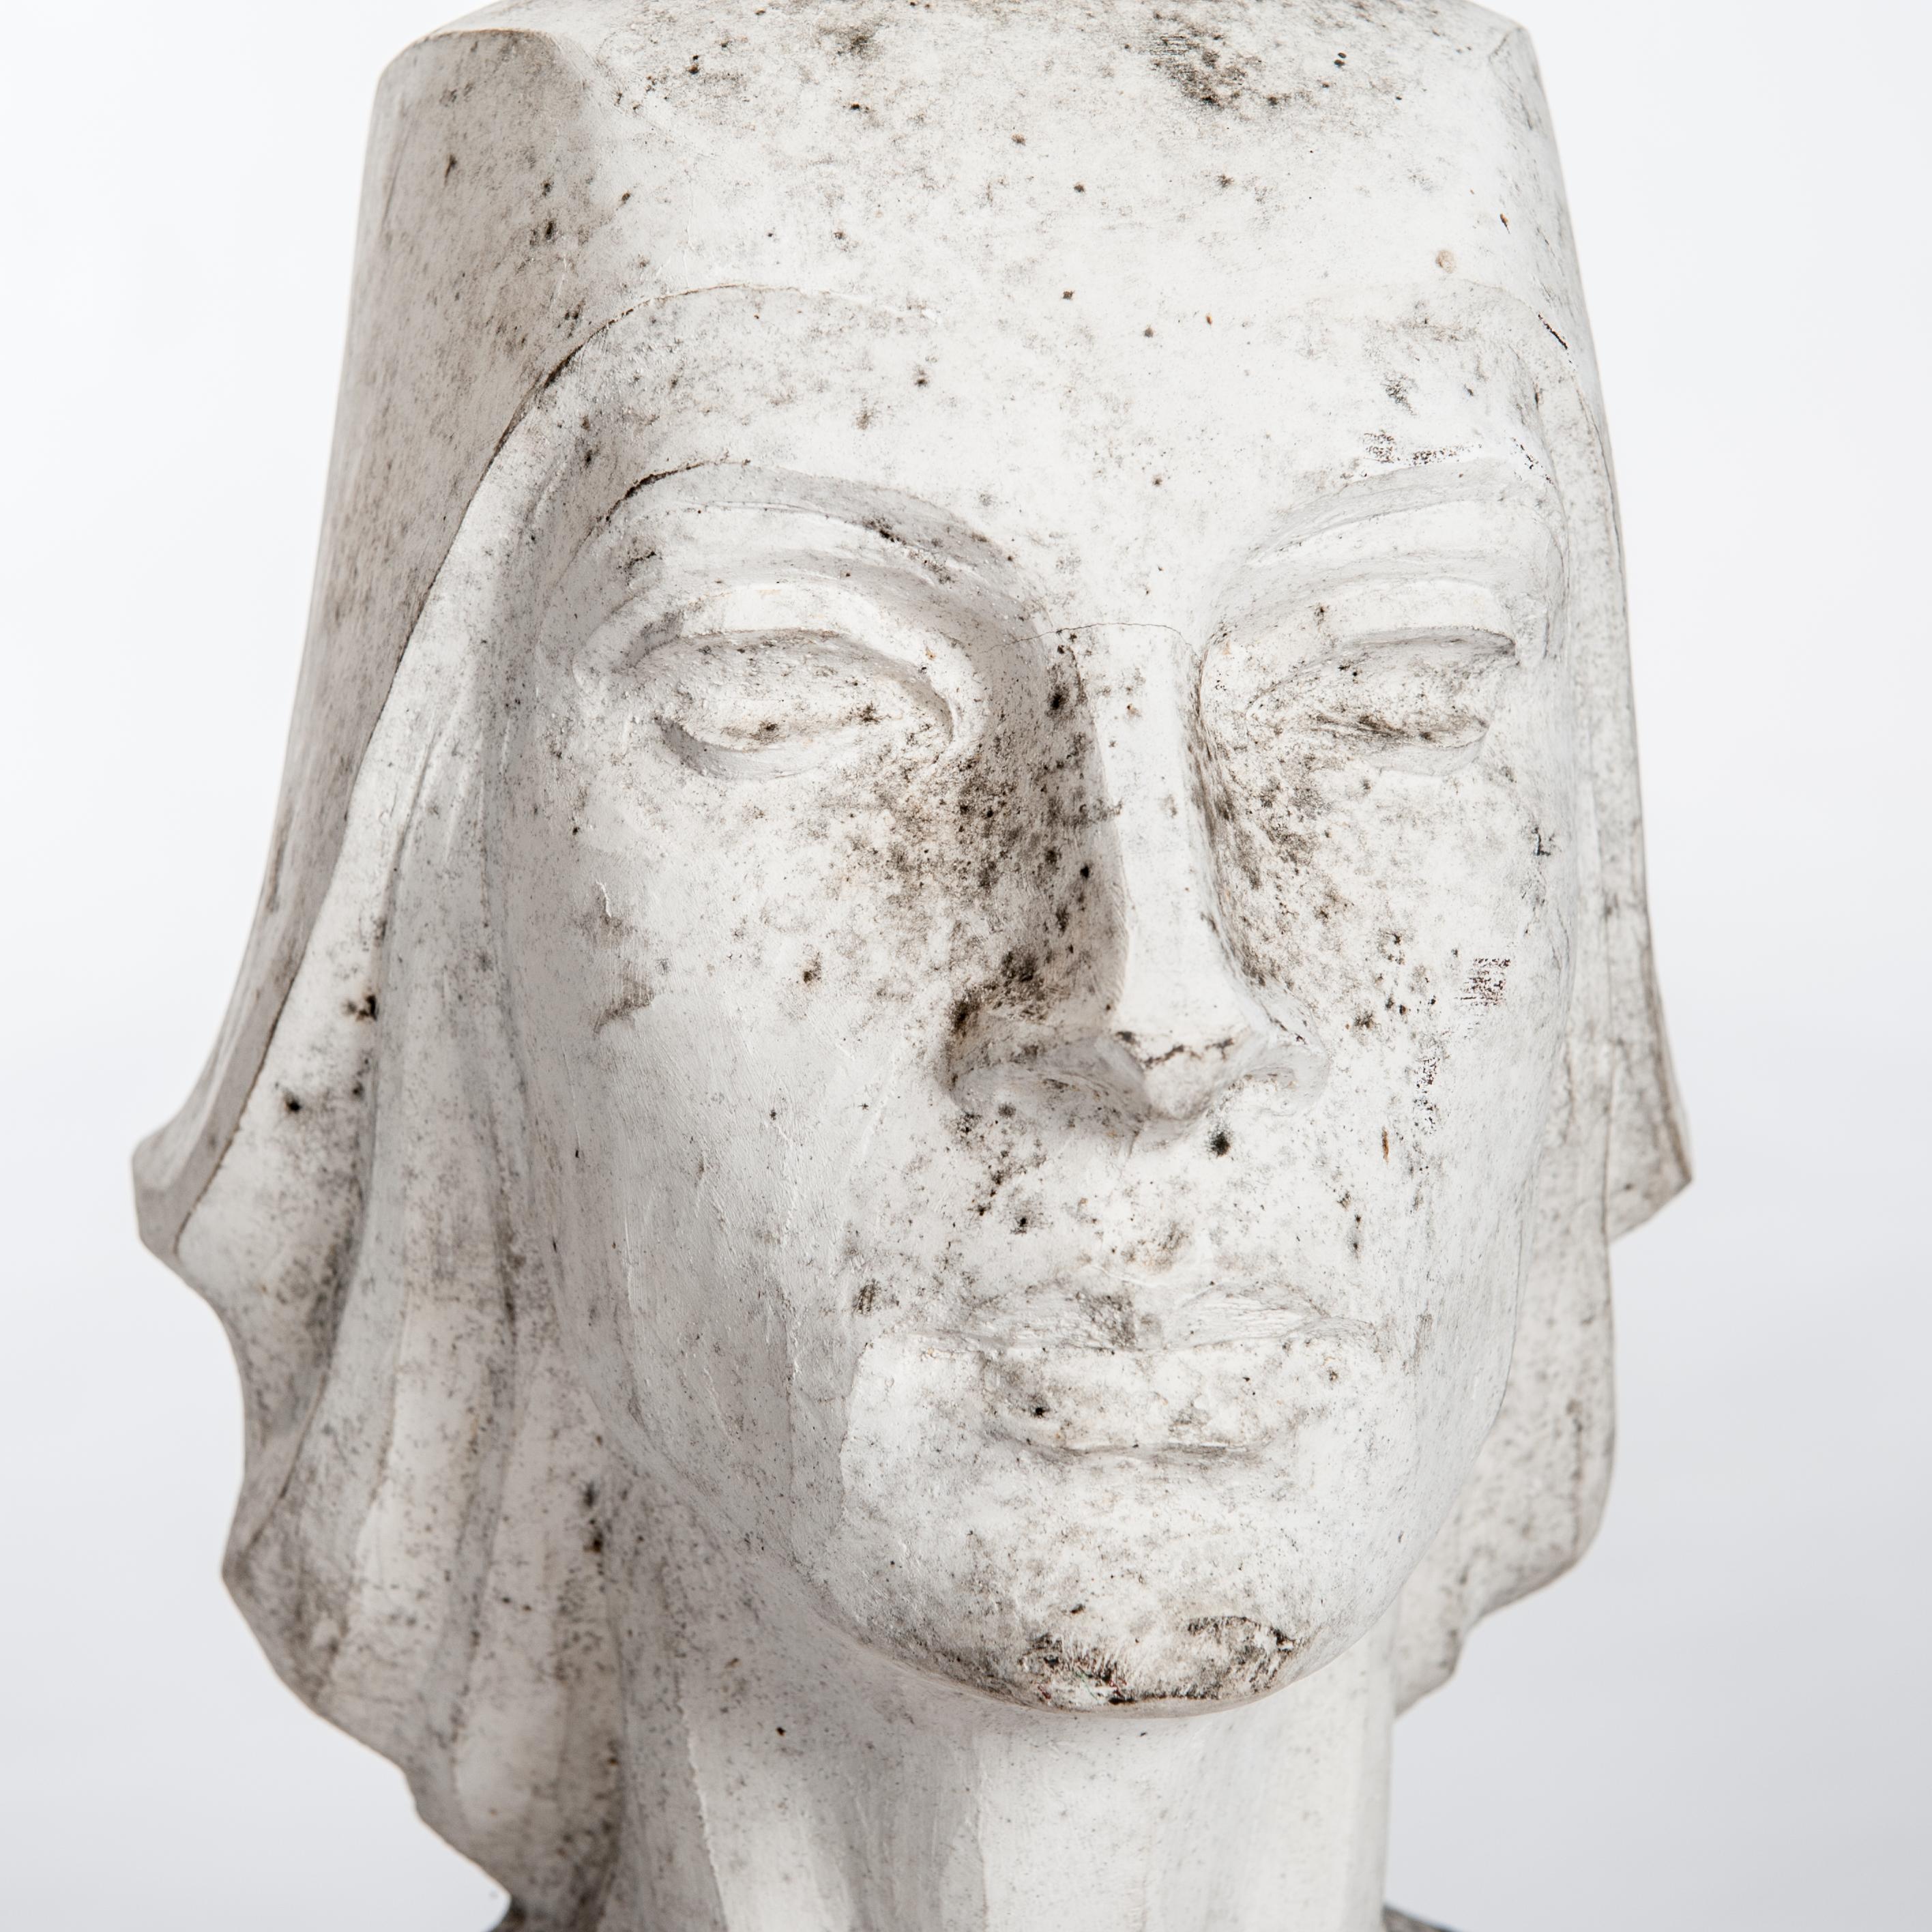 Modern plaster female bust / sculpture white colored patinated in grey and brown signed Lucita Latorre 1991.
The bust reveals a pure and stright lined design reminding of the Art Deco period.
Born 1941 in Tudela / Spain - Died 2014 in